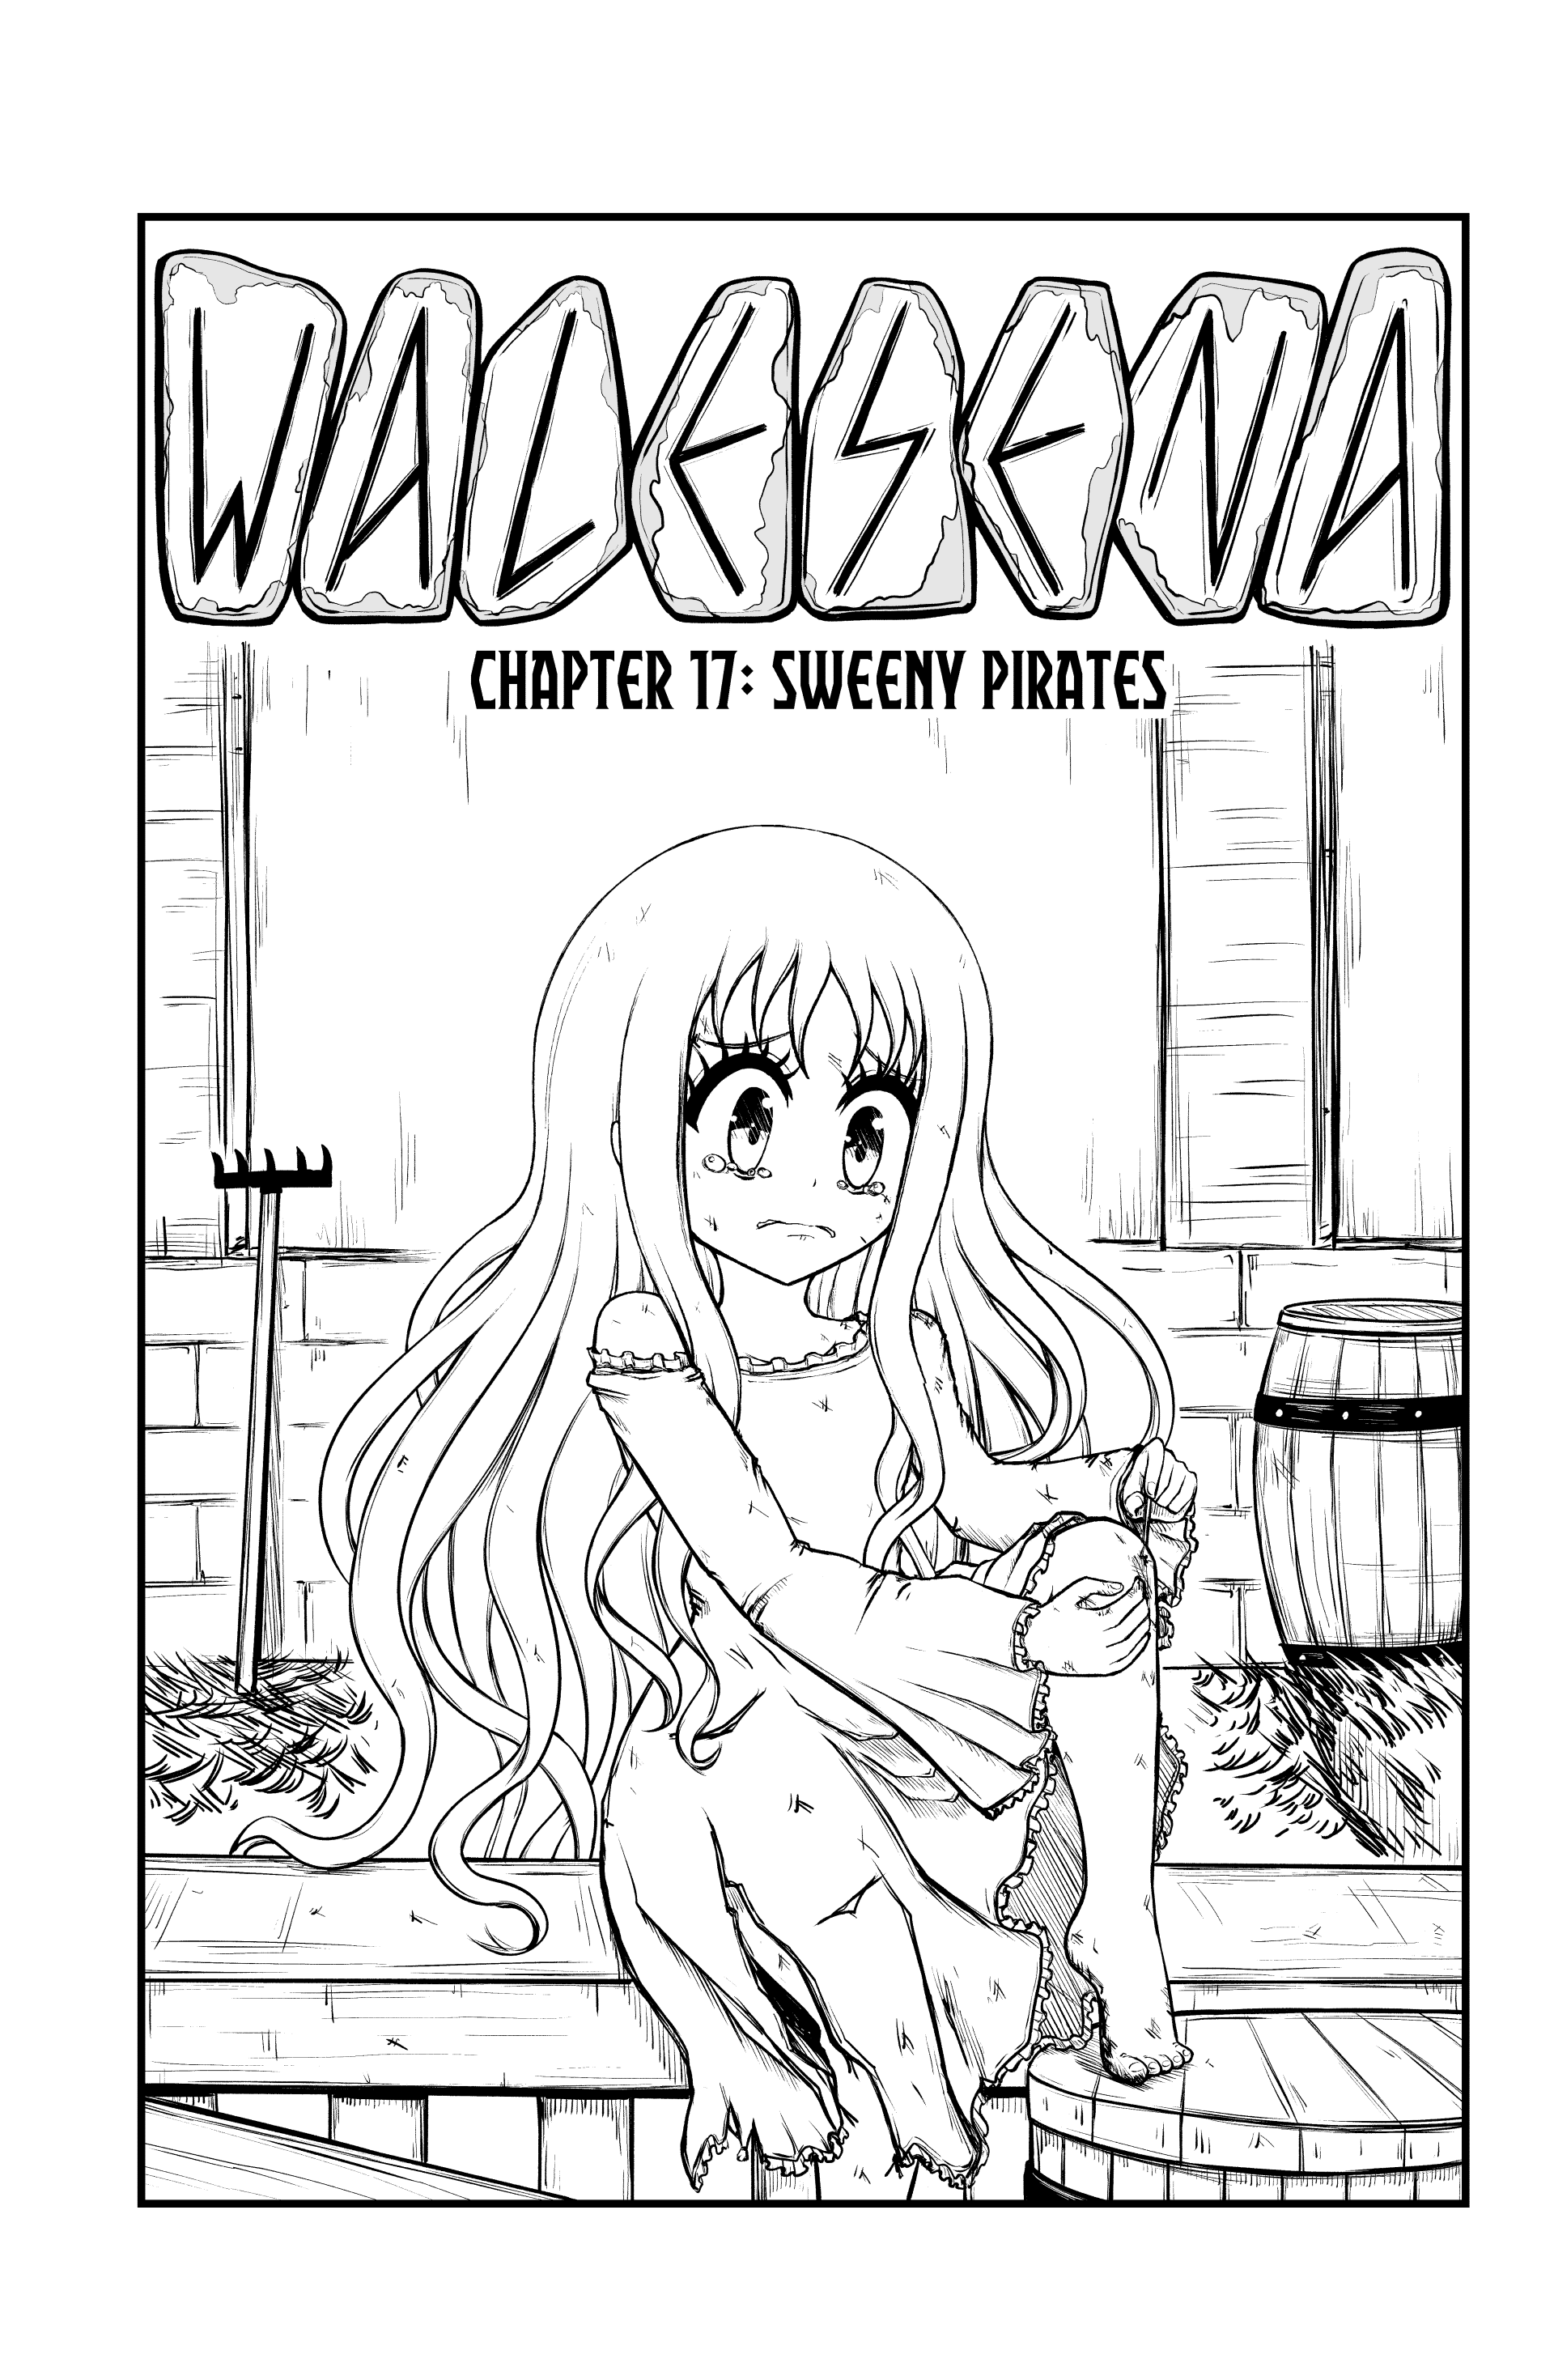 Walesena Vol.3 Chapter 17: Sweeny Pirates - Picture 1